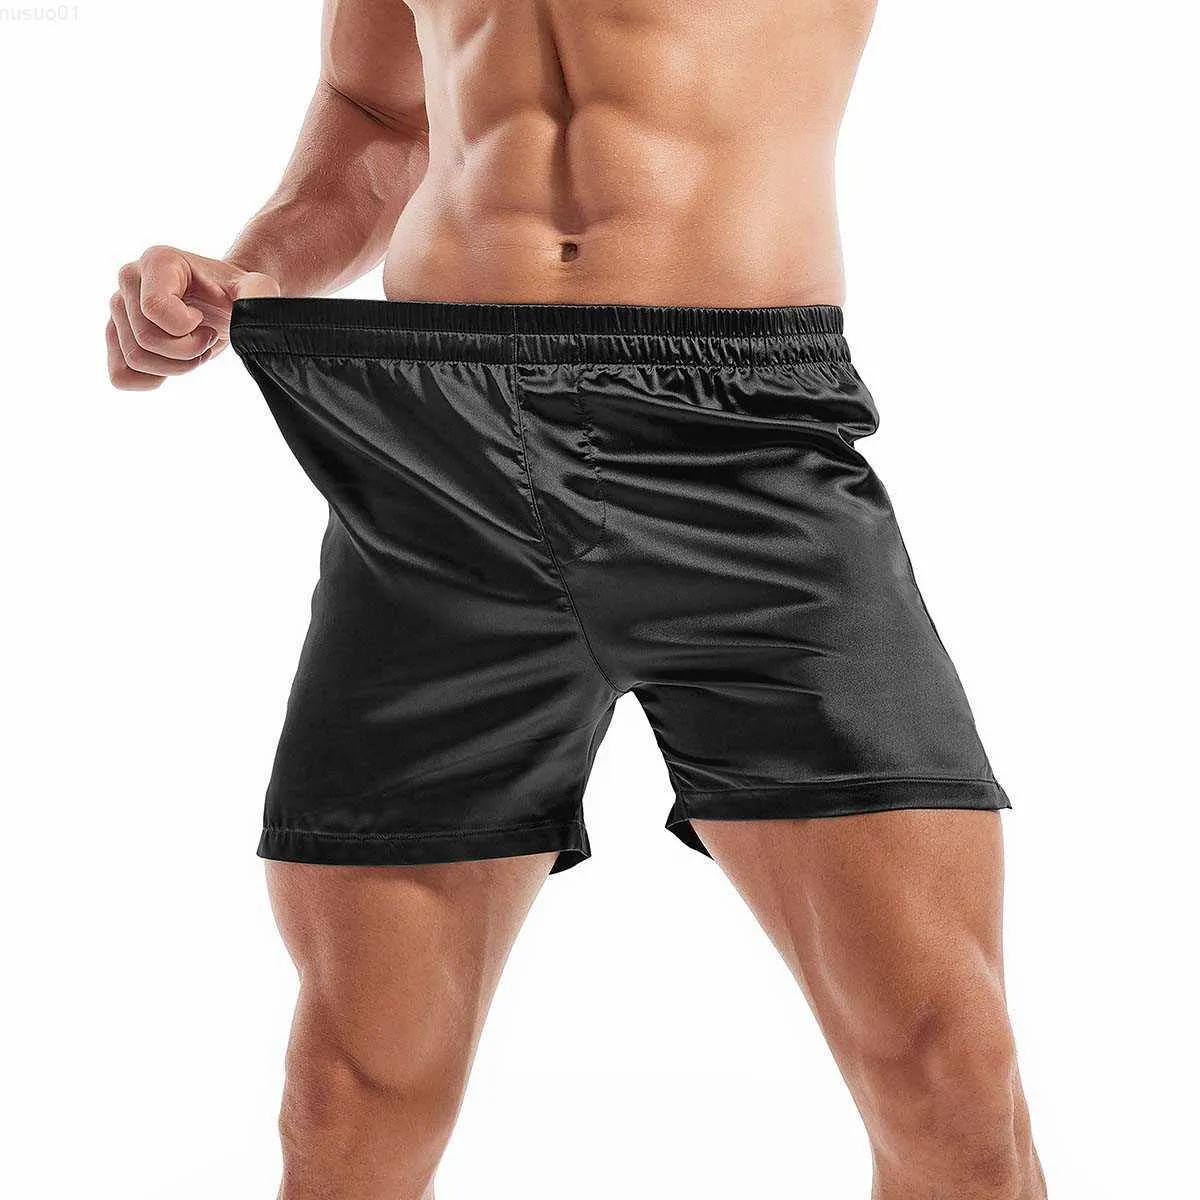 Mens Solid Color Satin Boxer Shorts Silk Like Casual Sleepwear, Smooth  Pajama Bottoms For Home, Yoga & Sports From Musuo01, $5.55